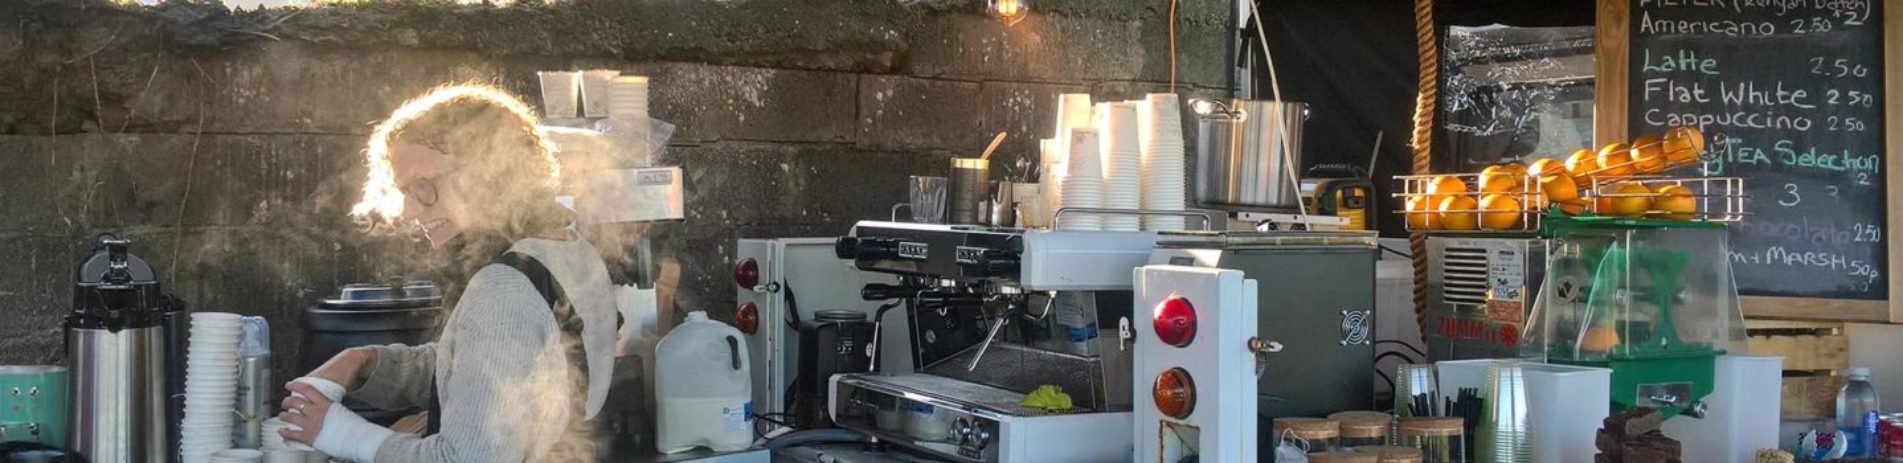 lady-with-glasses-smiling-and-preparing-coffee-behind-coffee-bar-with-coffee-machinery-and-price-list-on-chalk-board-at-forth-valley-food-fest